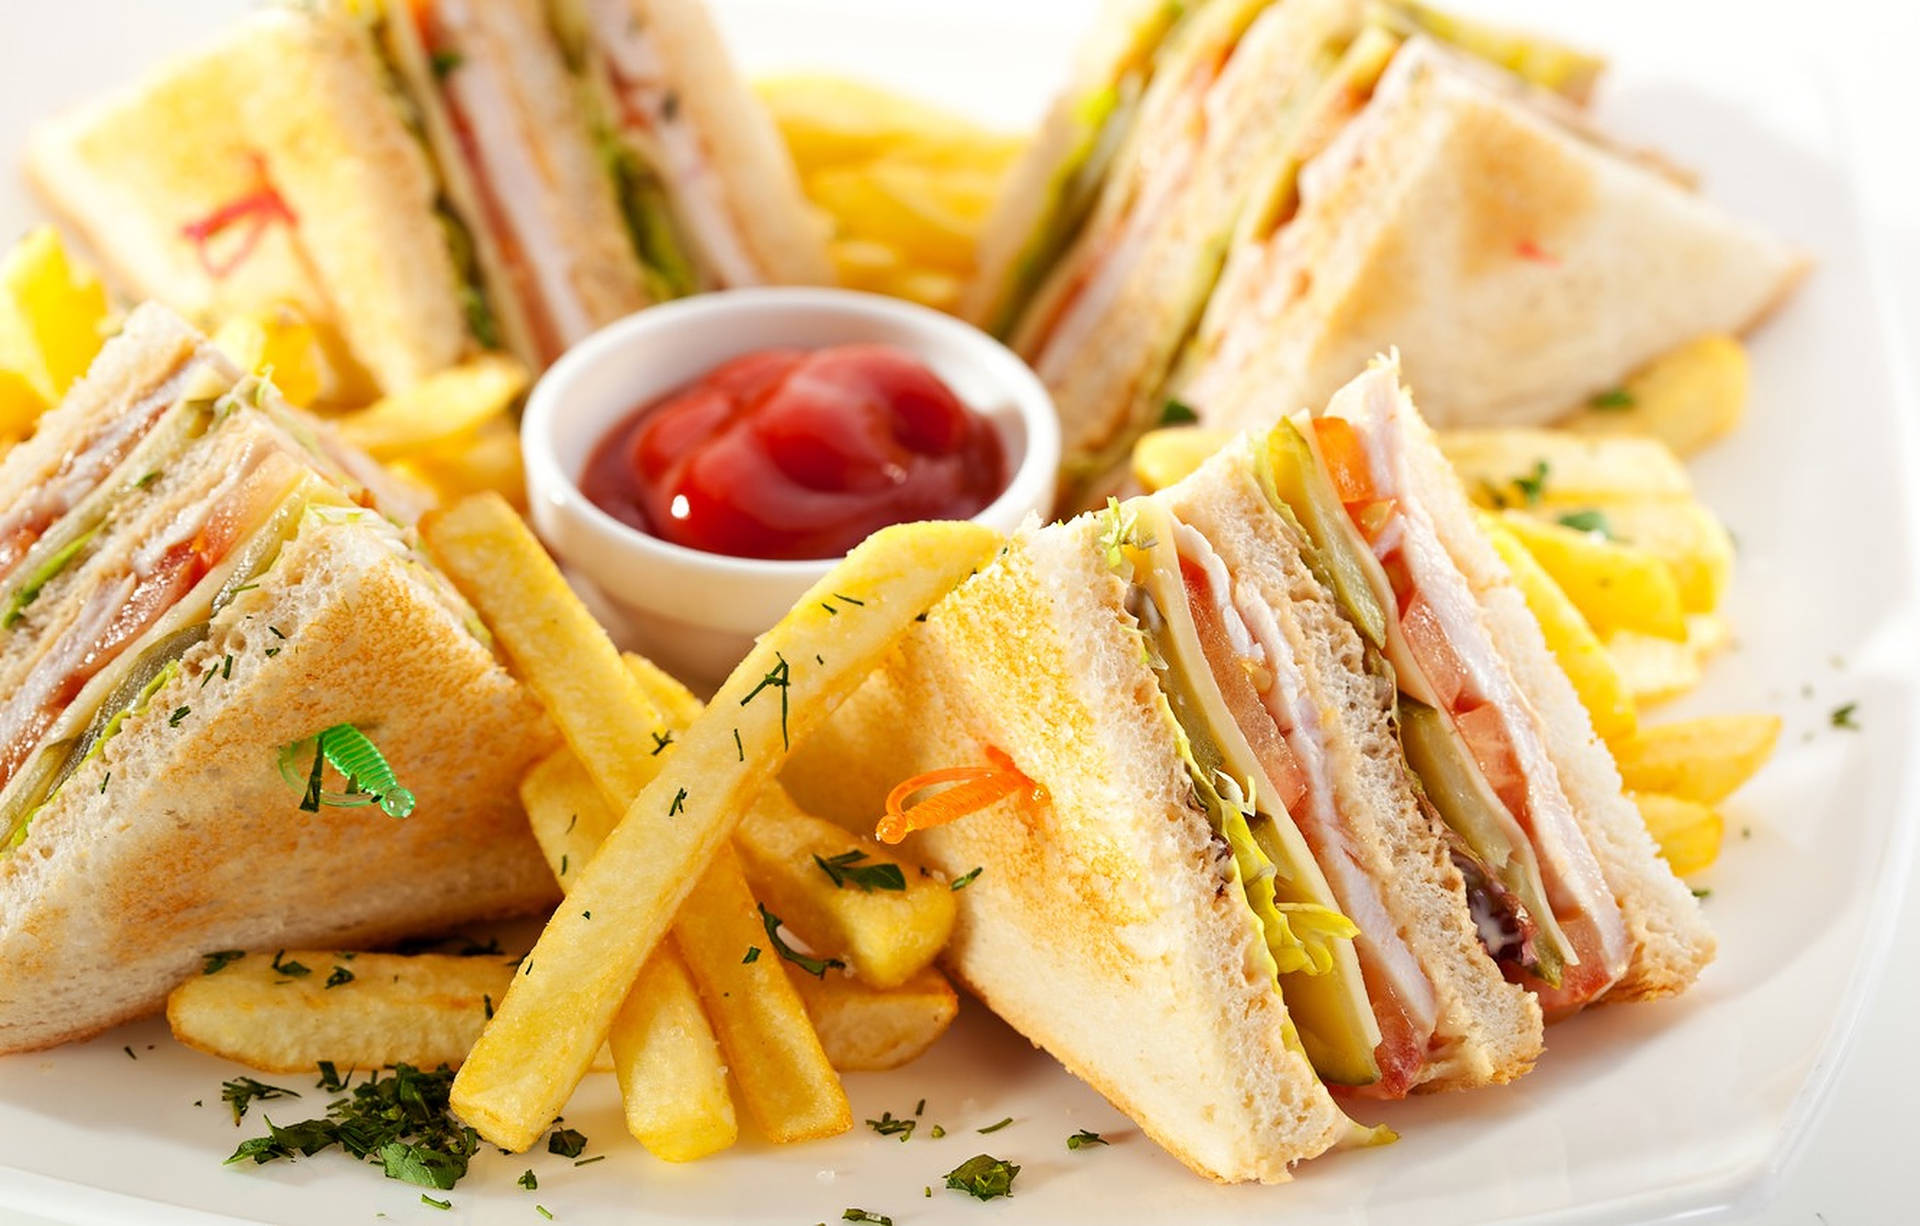 Sandwiches With Fries